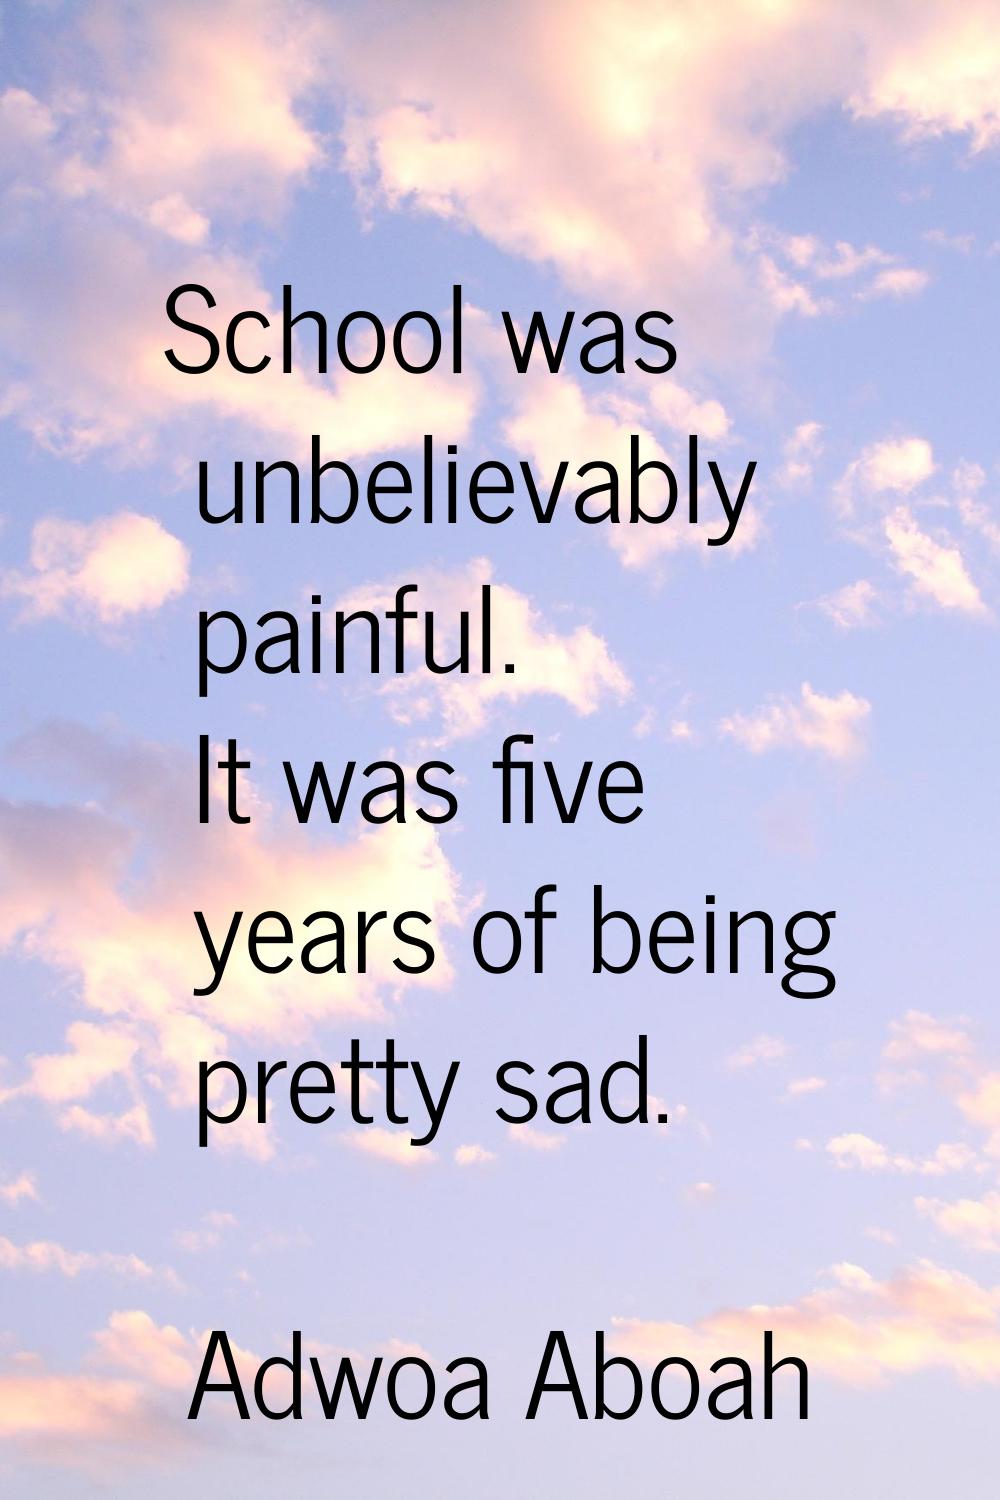 School was unbelievably painful. It was five years of being pretty sad.